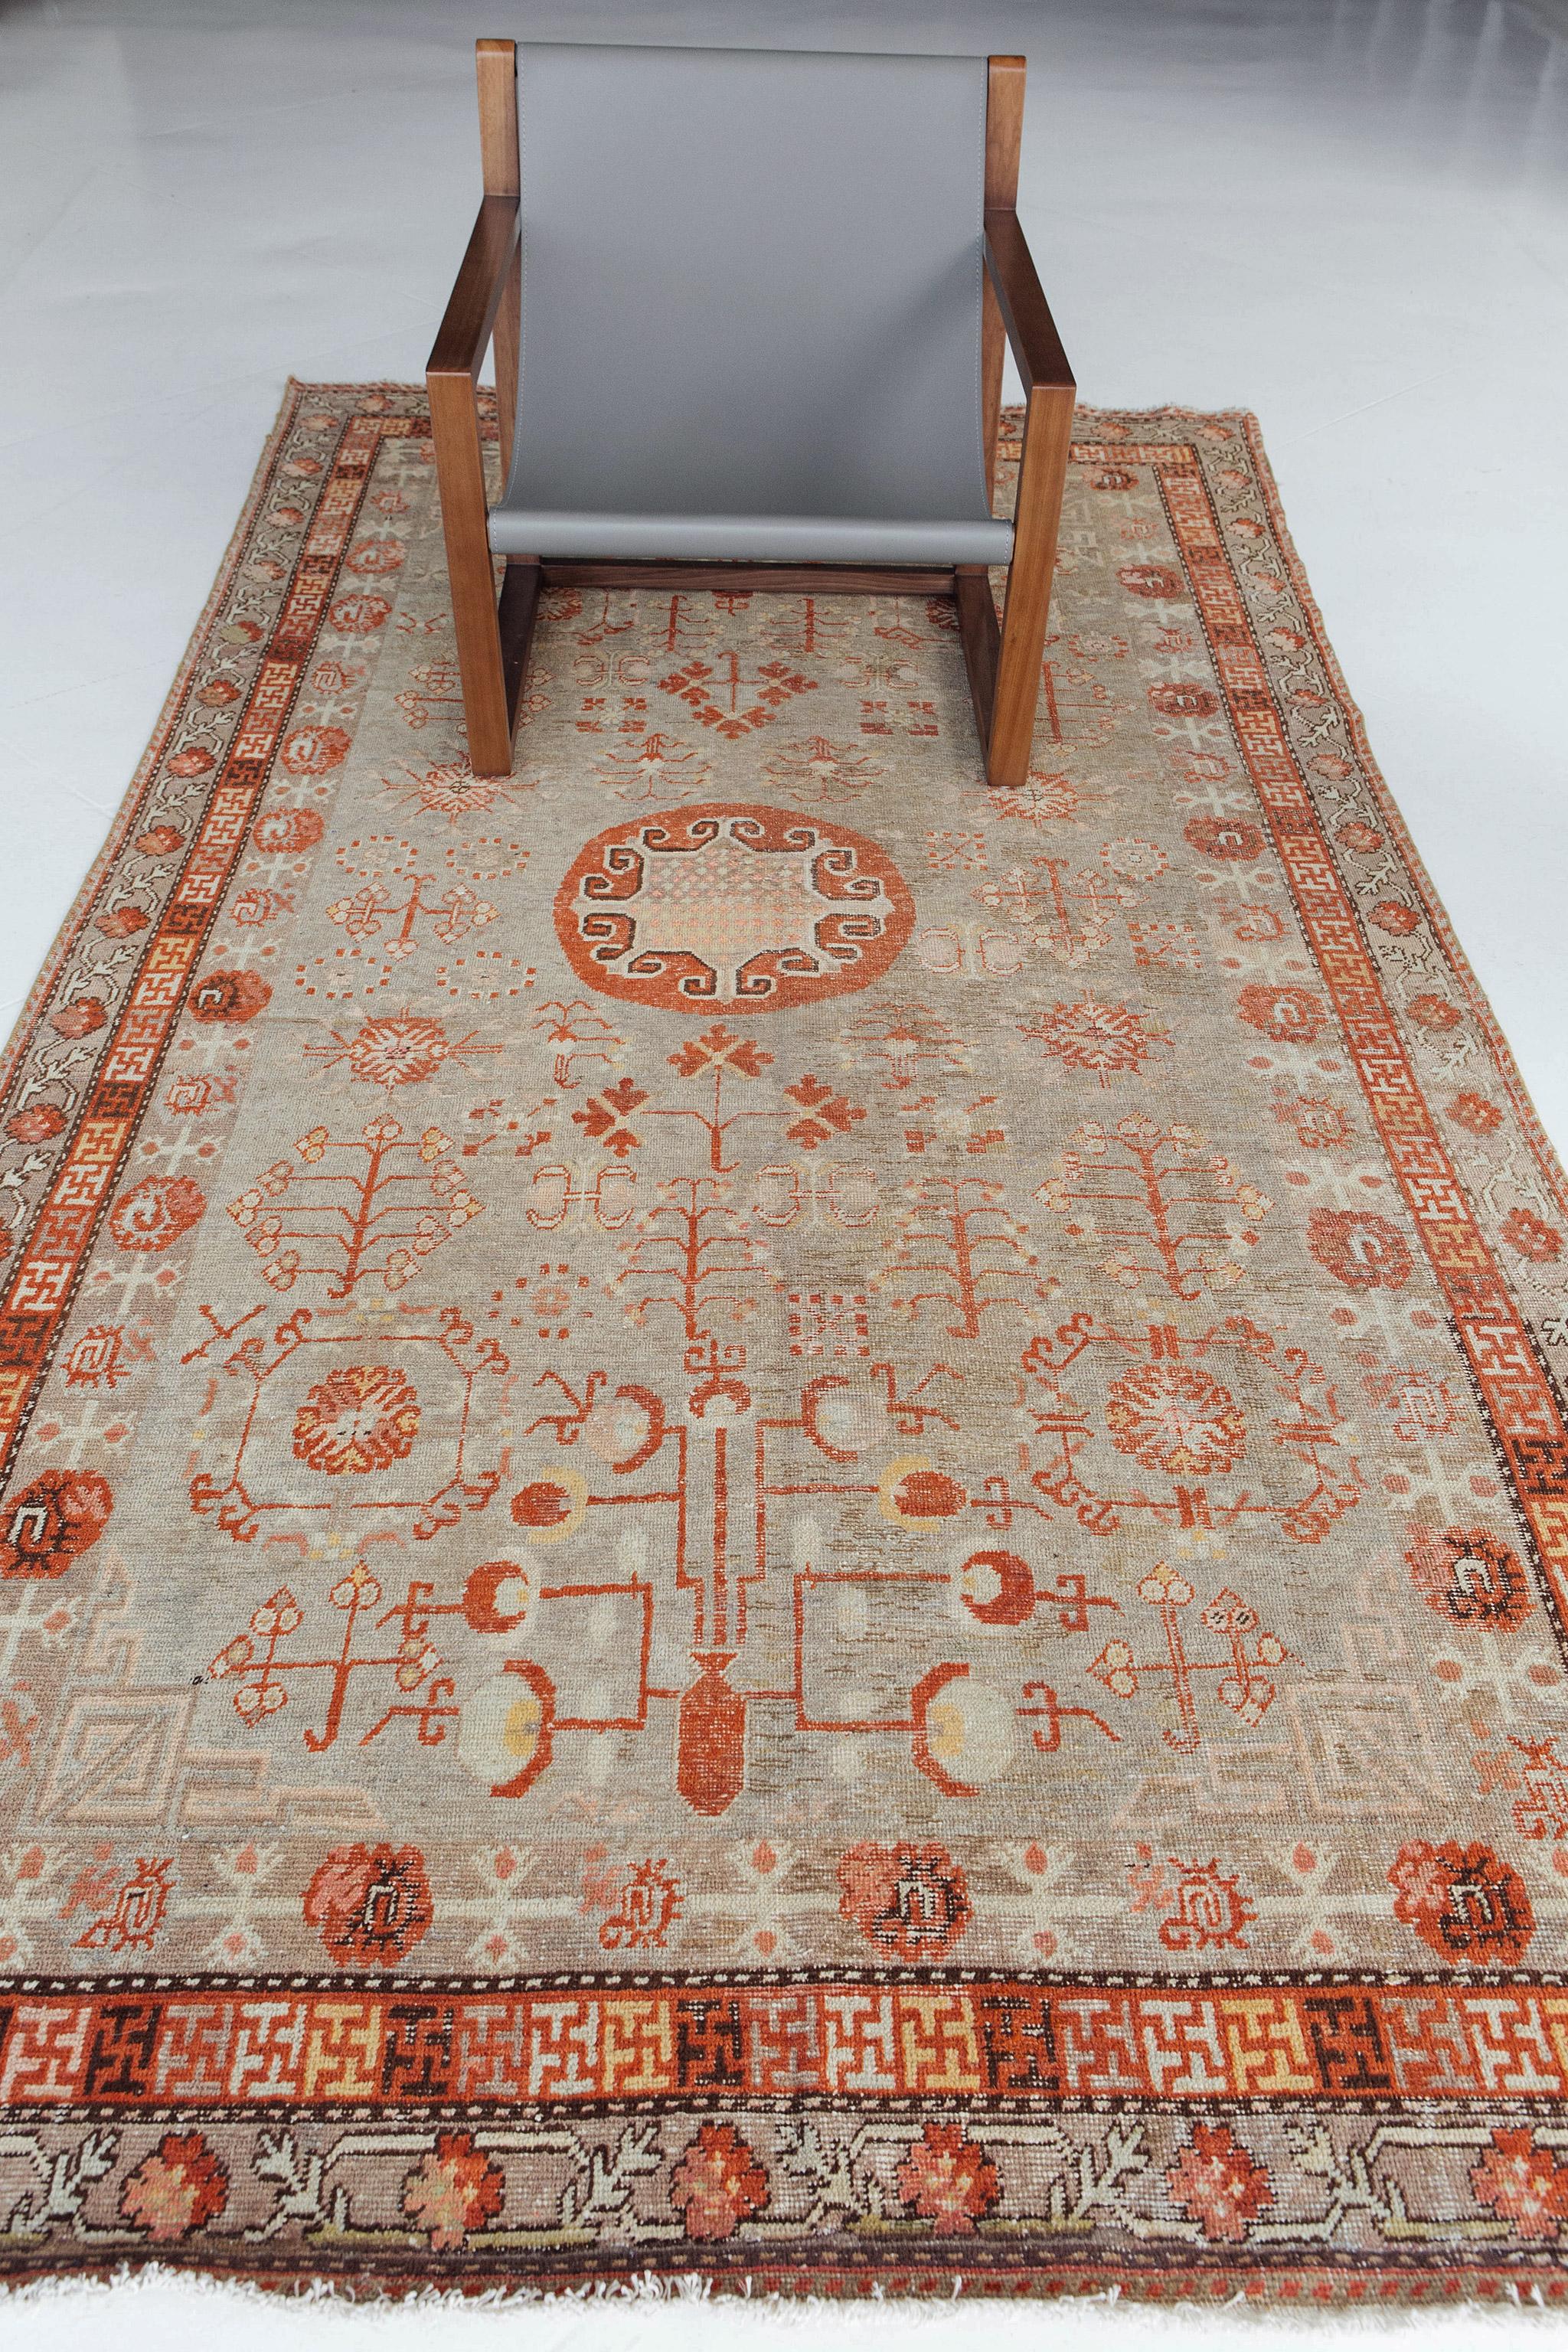 An epitome of history, character and culture, antique Khotan rugs add richness to a room. This rug features geometric and abstract drawings with rich colors and a small circular medallion. A subtle green and red are the prominent color pallets on